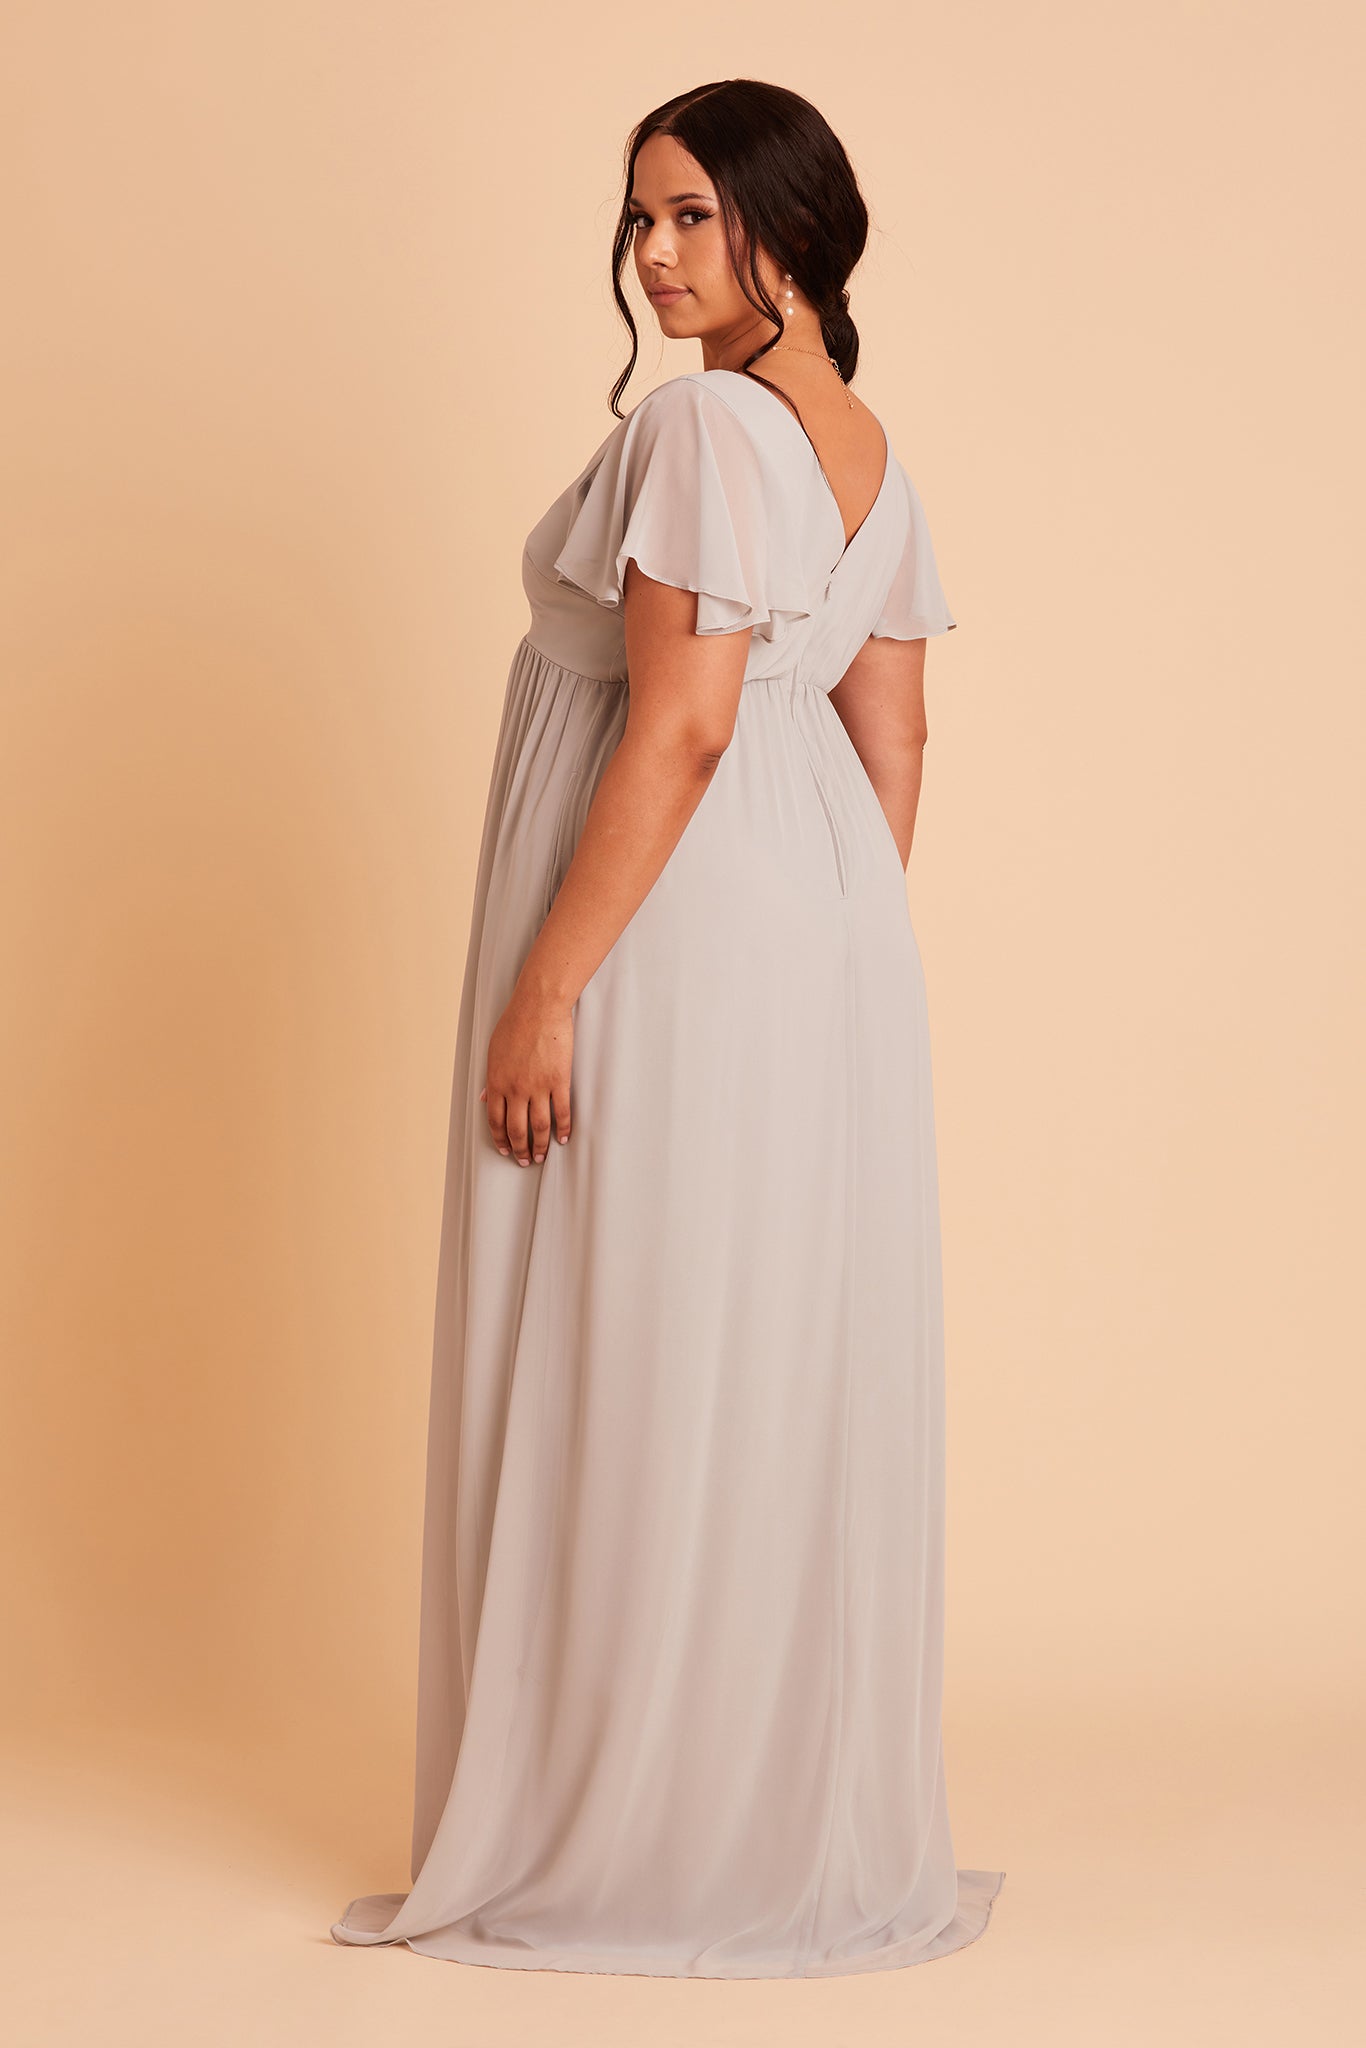 Hannah empire plus size bridesmaid dress in dove gray chiffon by Birdy Grey, side view